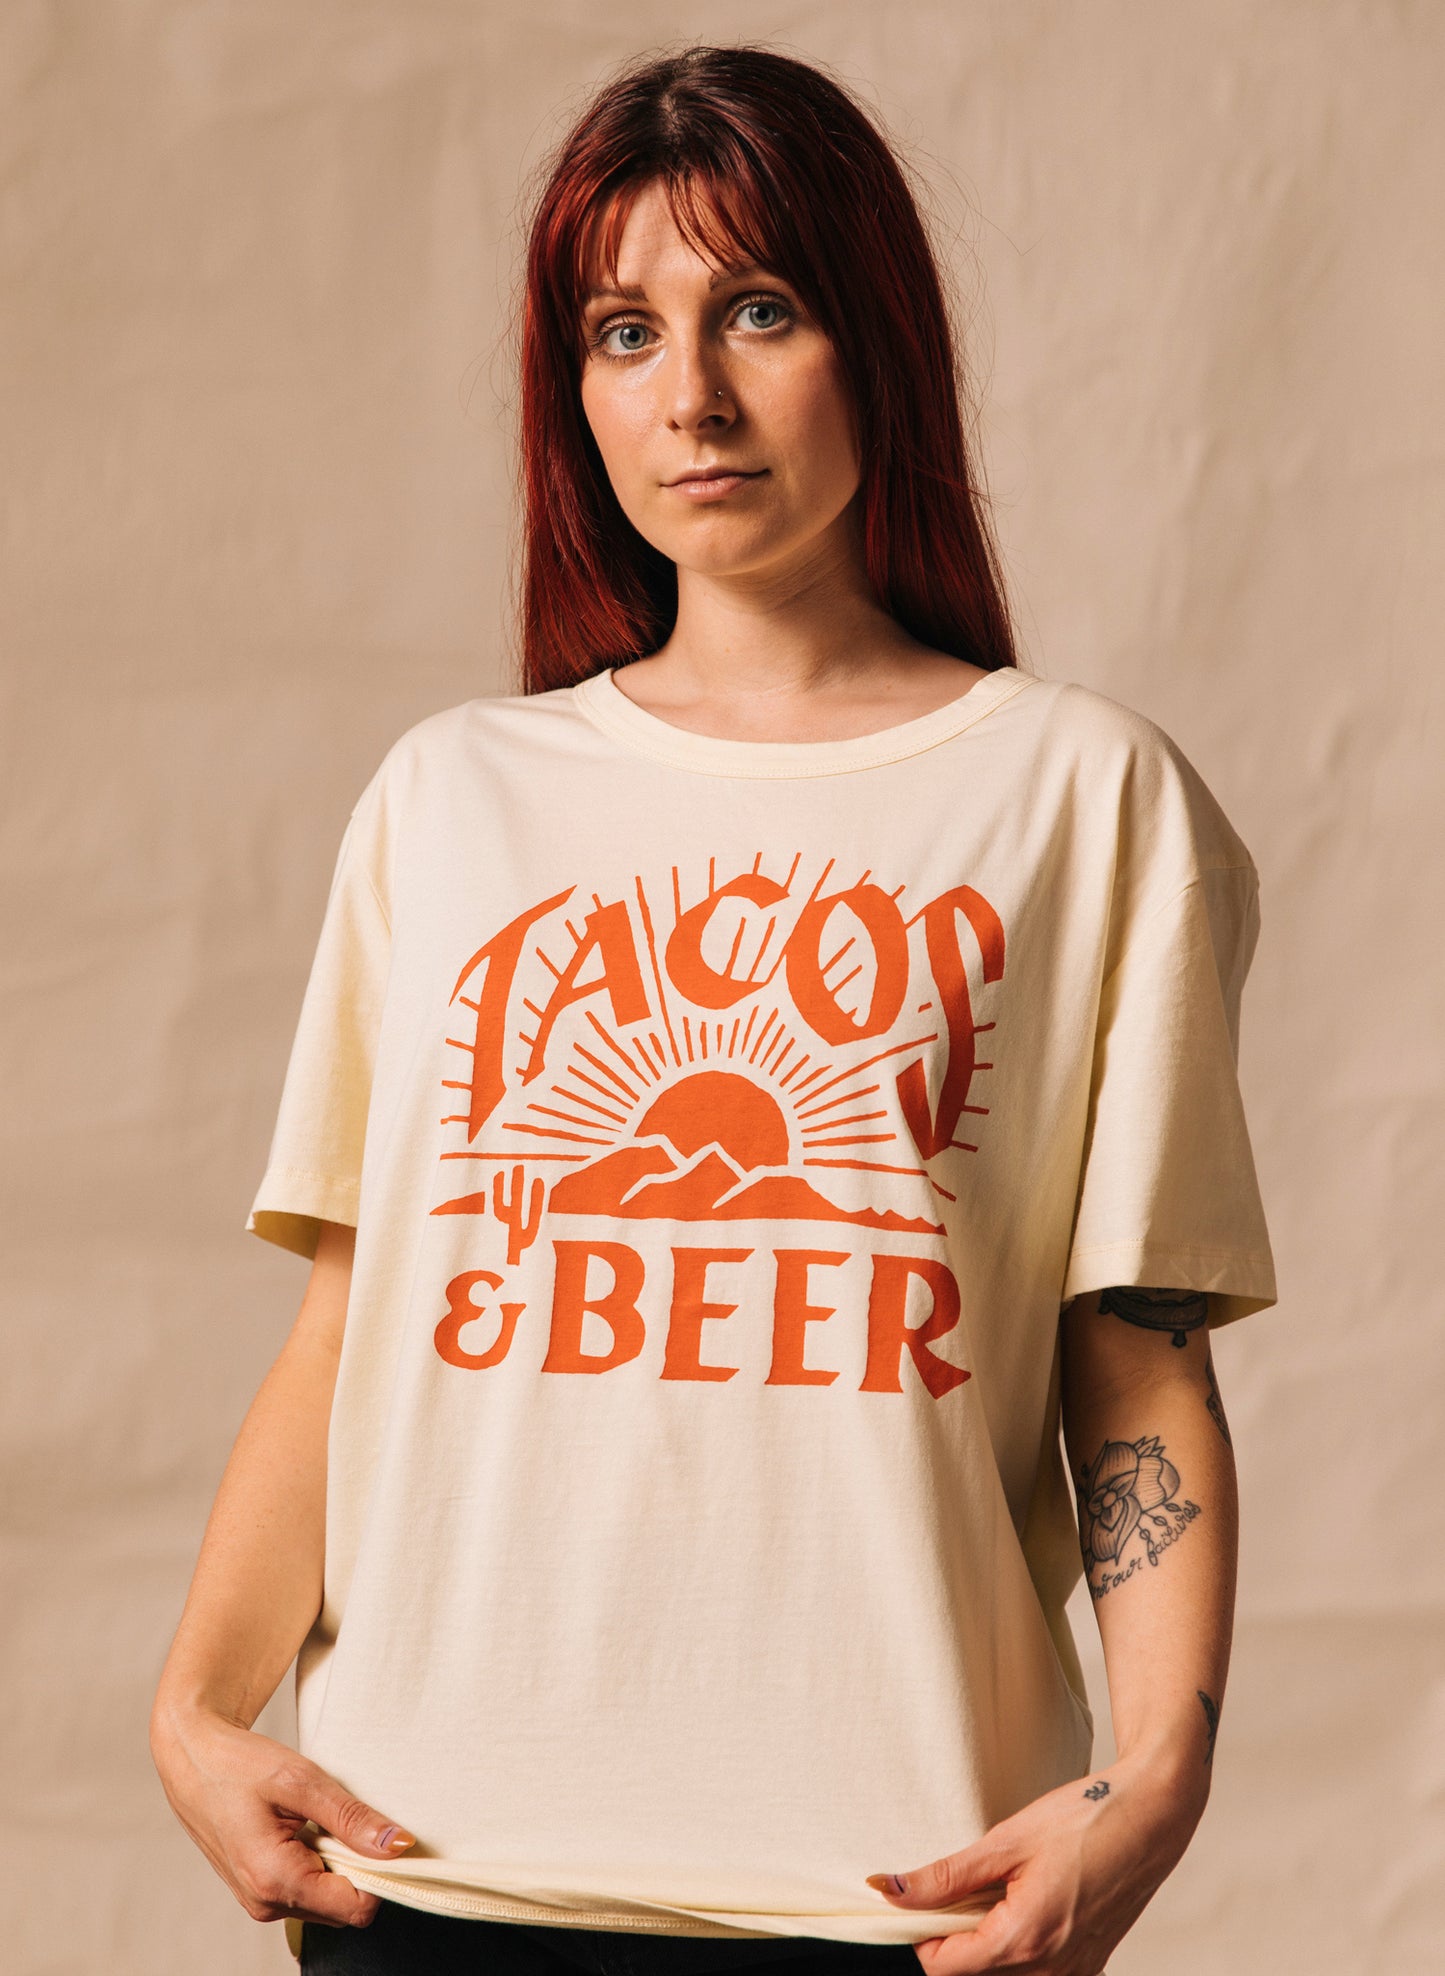 Tacos & Beer Desert Texas Mexican Food Taco Foodie T-shirt